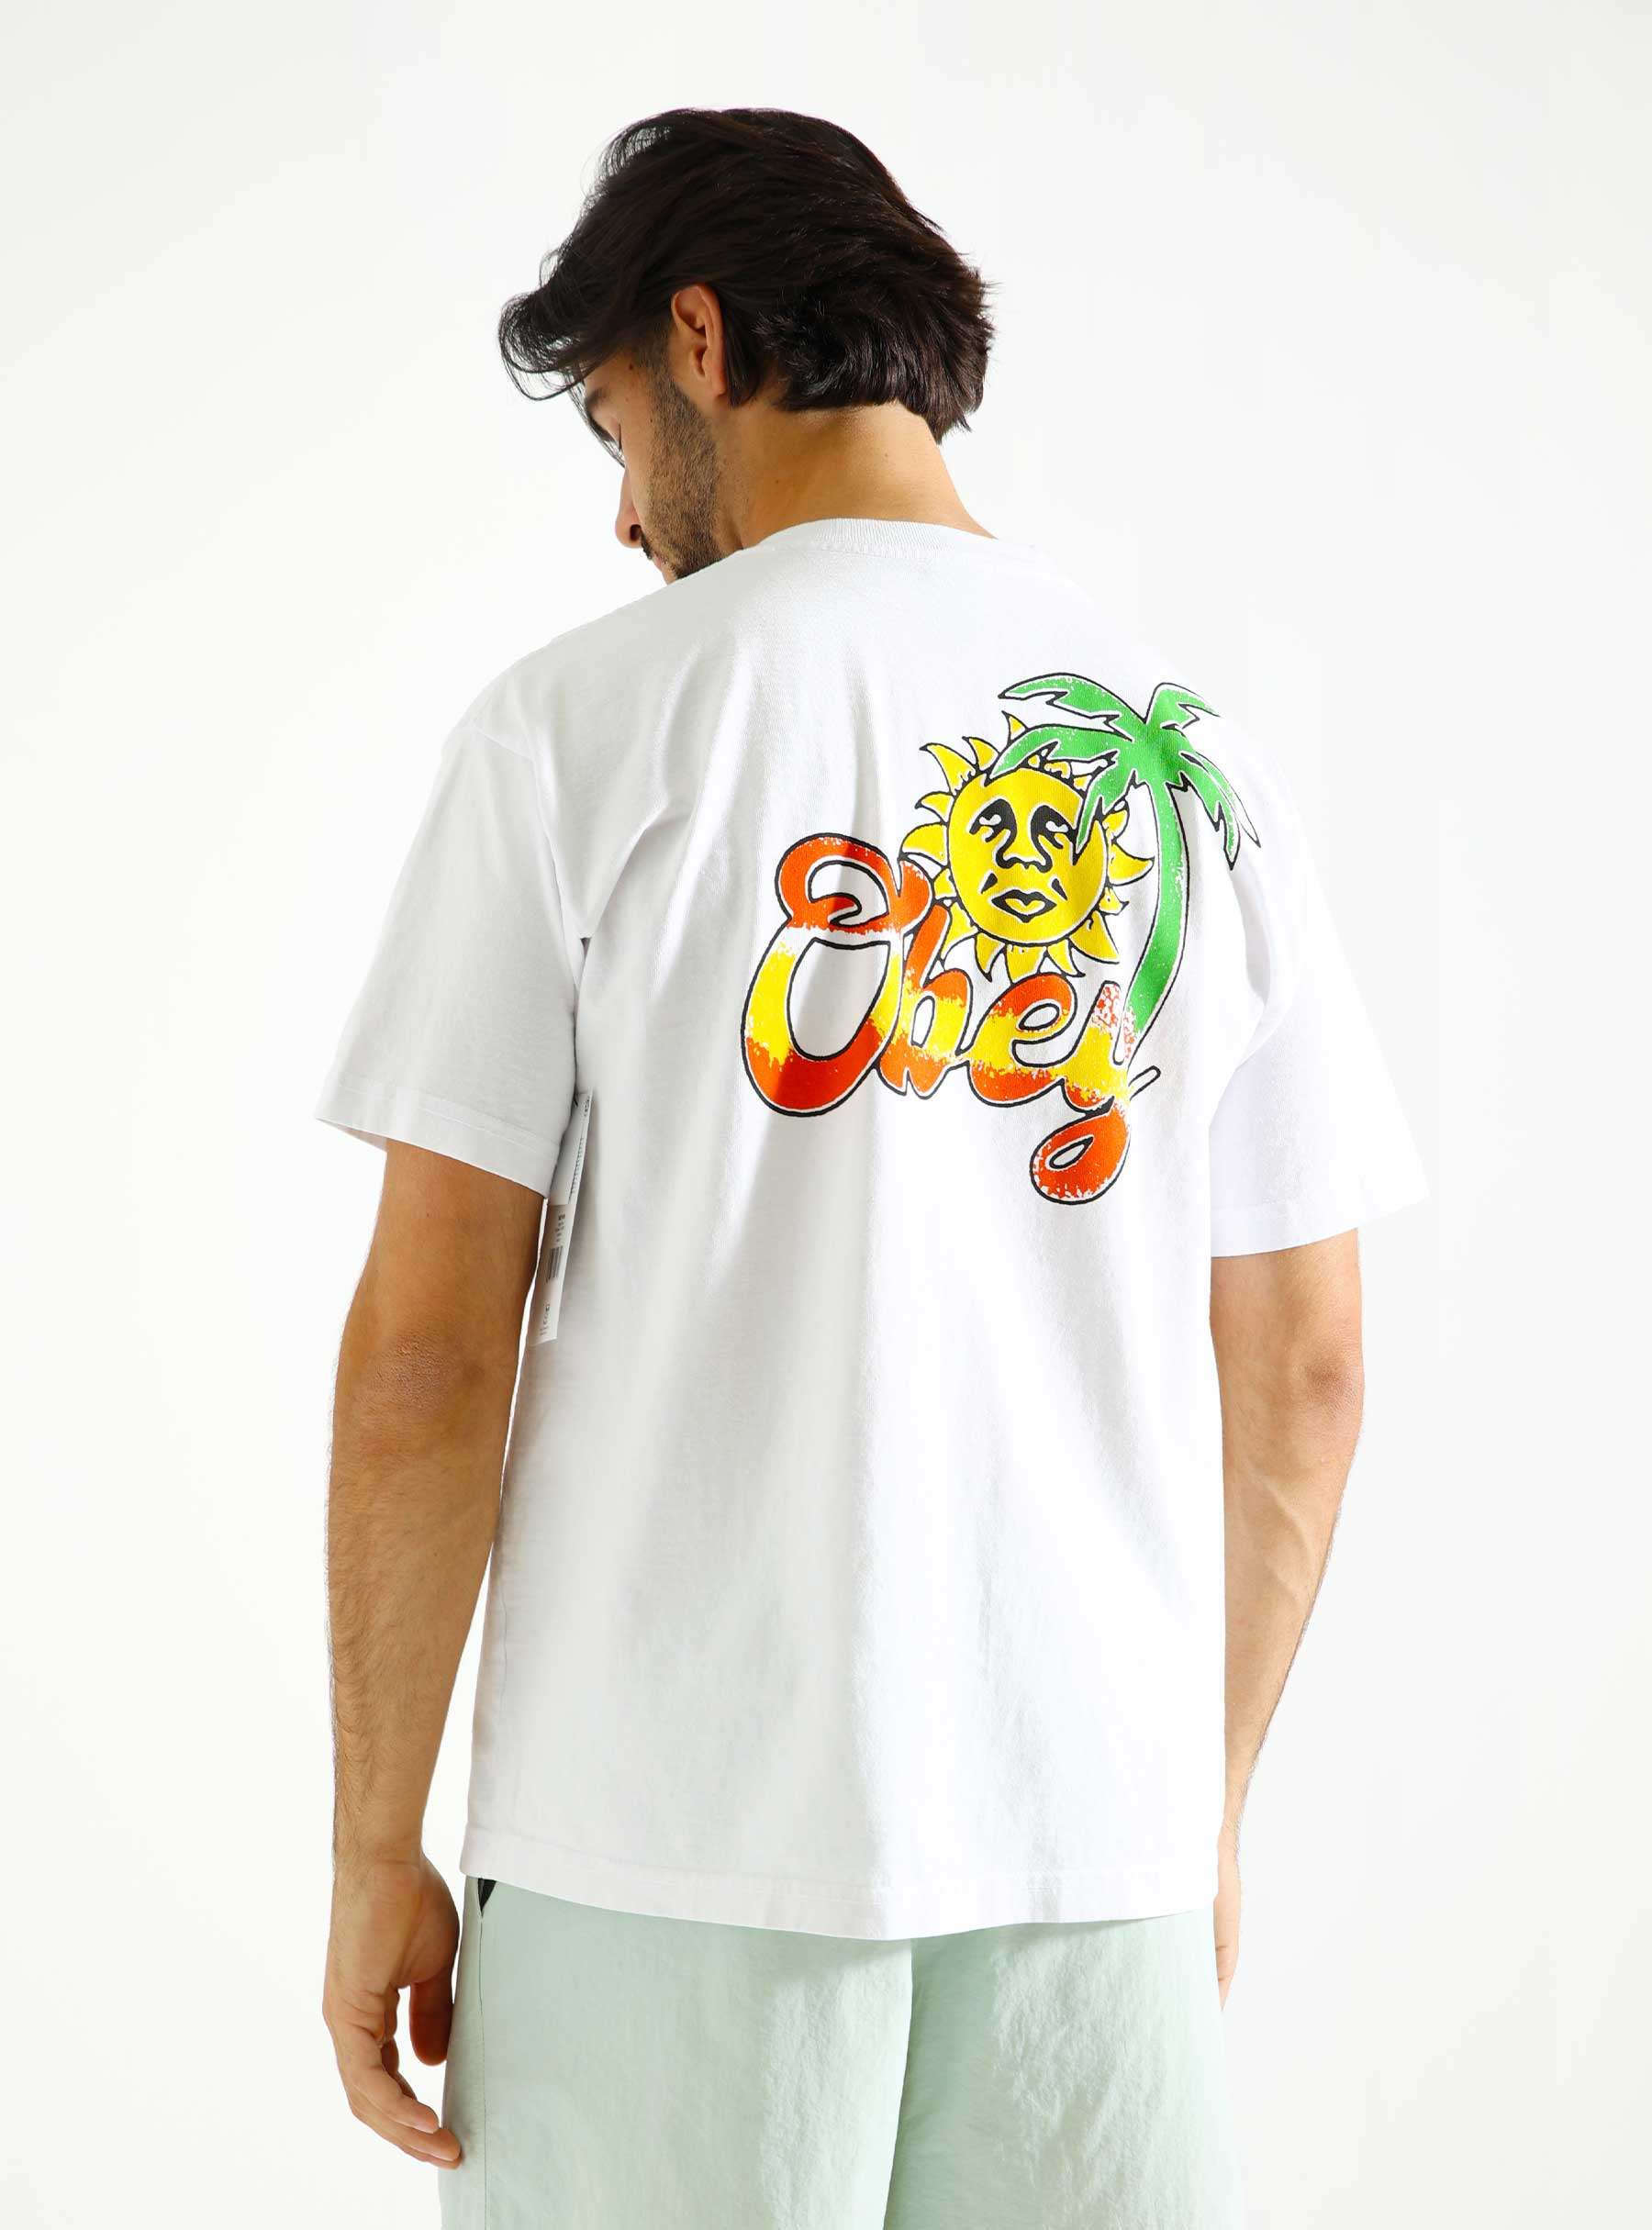 Island Of Obey T-Shirt White 166913756-WHT